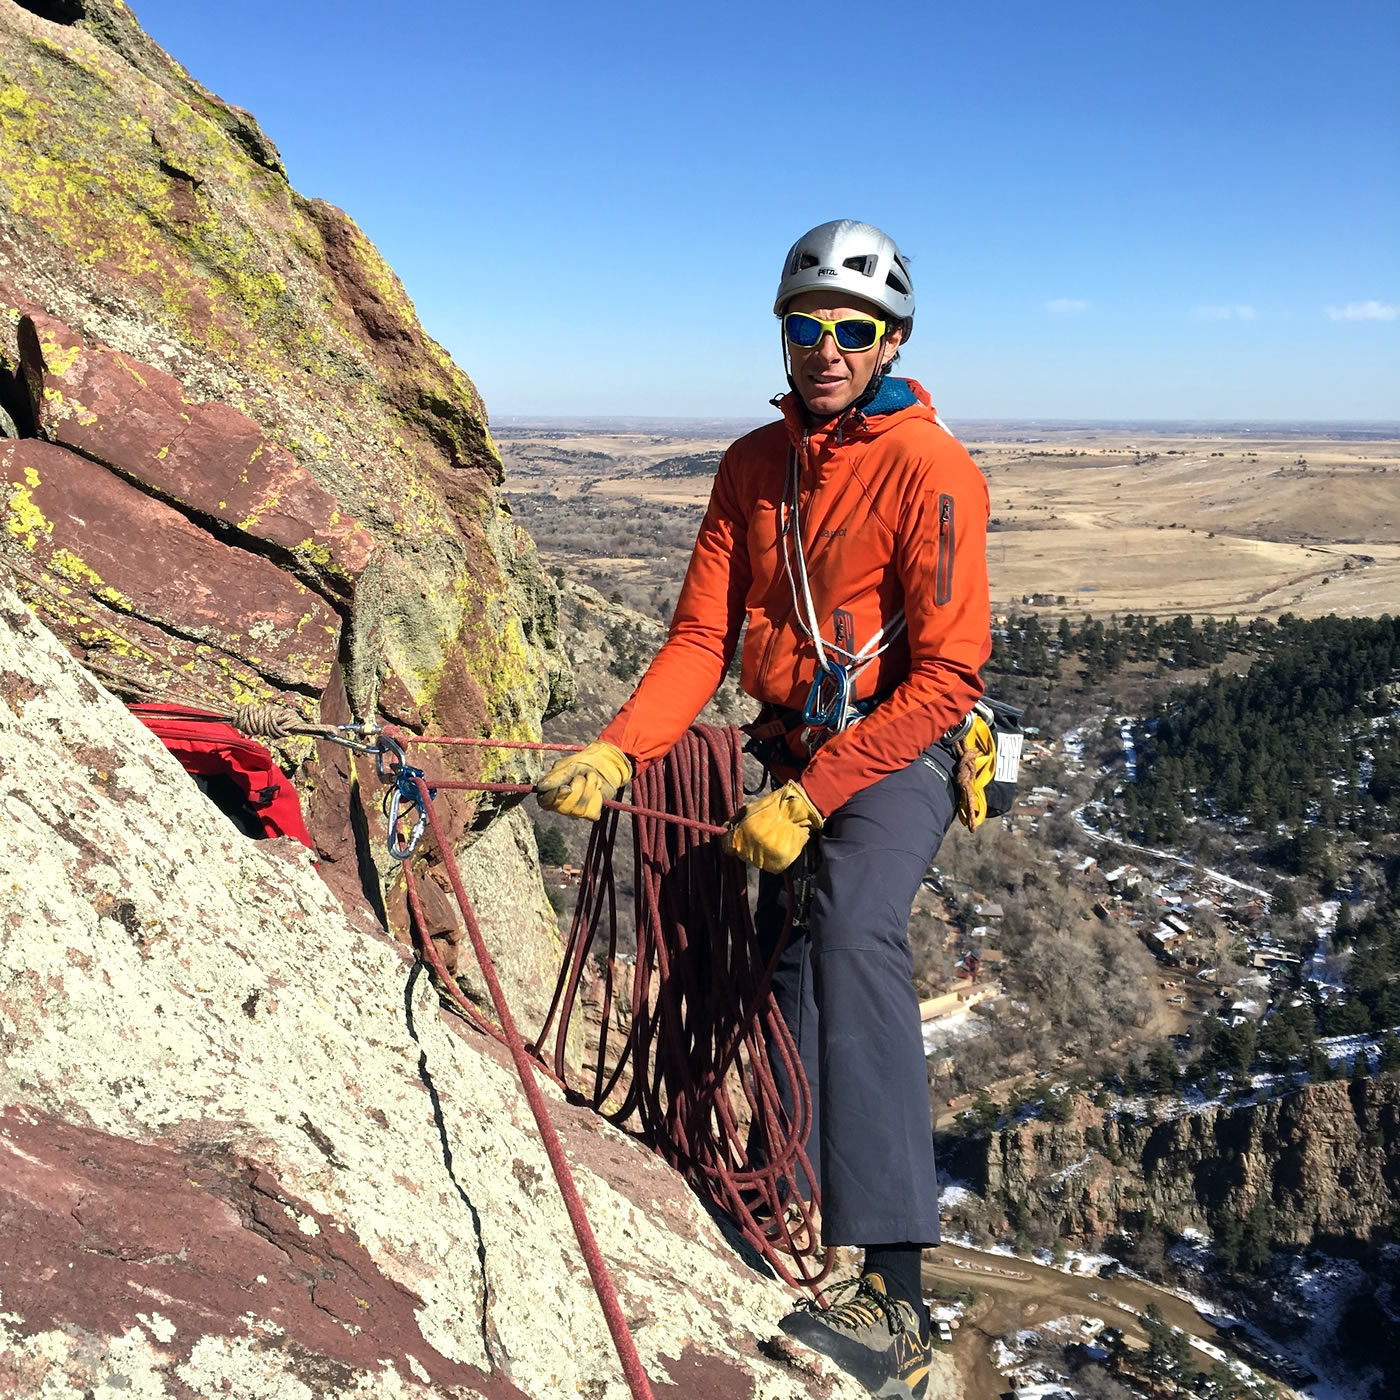 Mike Lewis guides Anthill Direct (5.9-) in Eldorado Canyon, Colorado, using the DMM Pivot belay device [Photo] Peter Braam